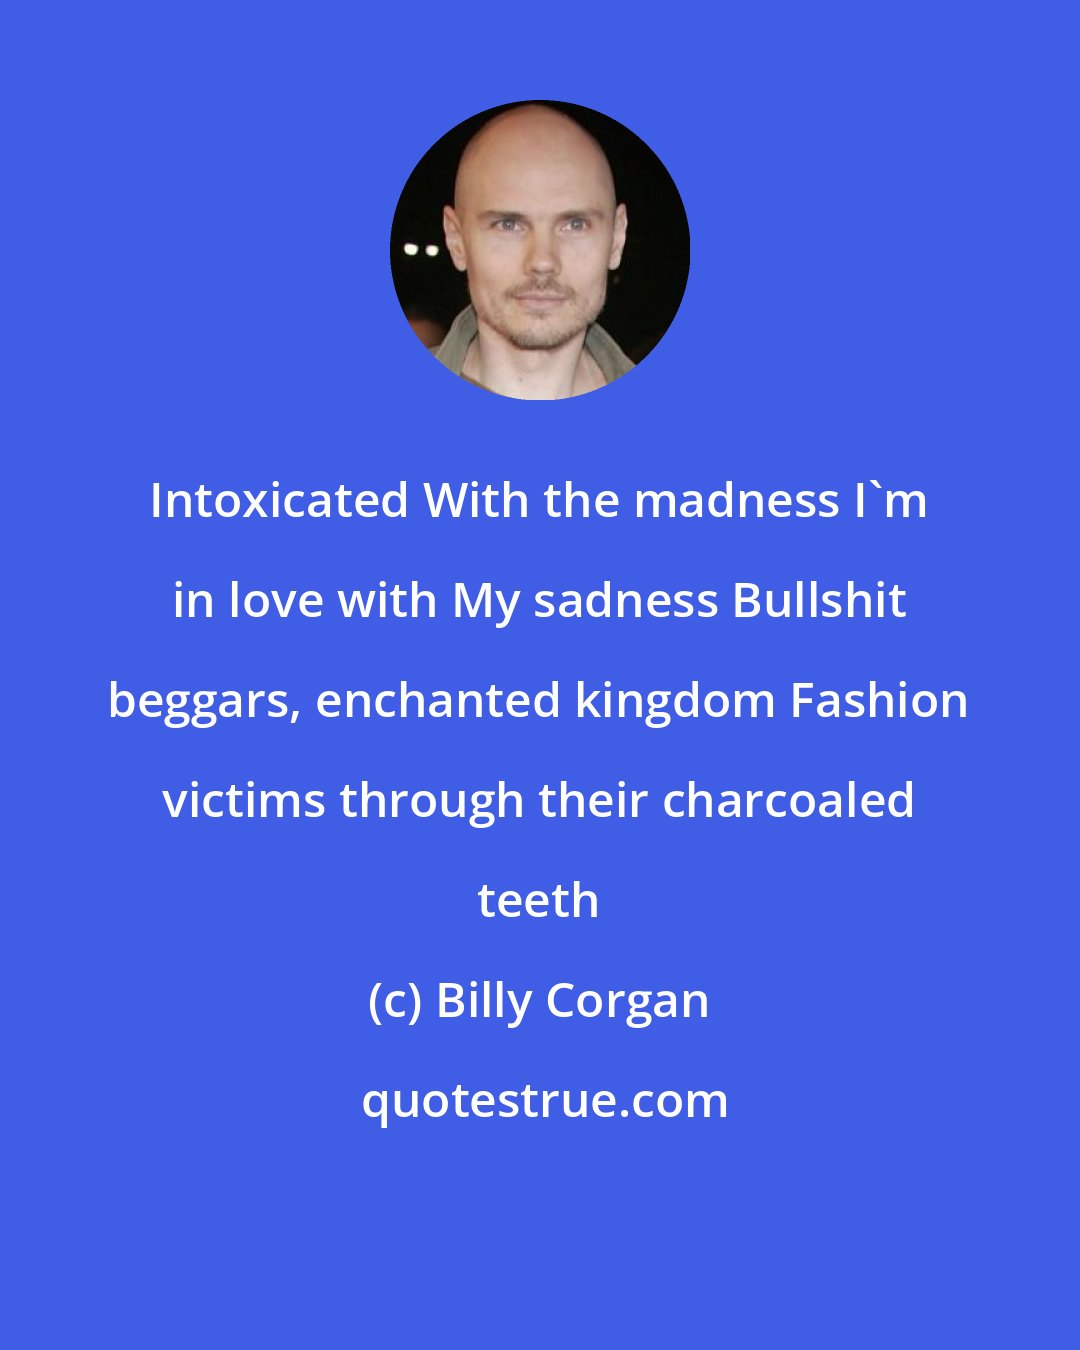 Billy Corgan: Intoxicated With the madness I'm in love with My sadness Bullshit beggars, enchanted kingdom Fashion victims through their charcoaled teeth